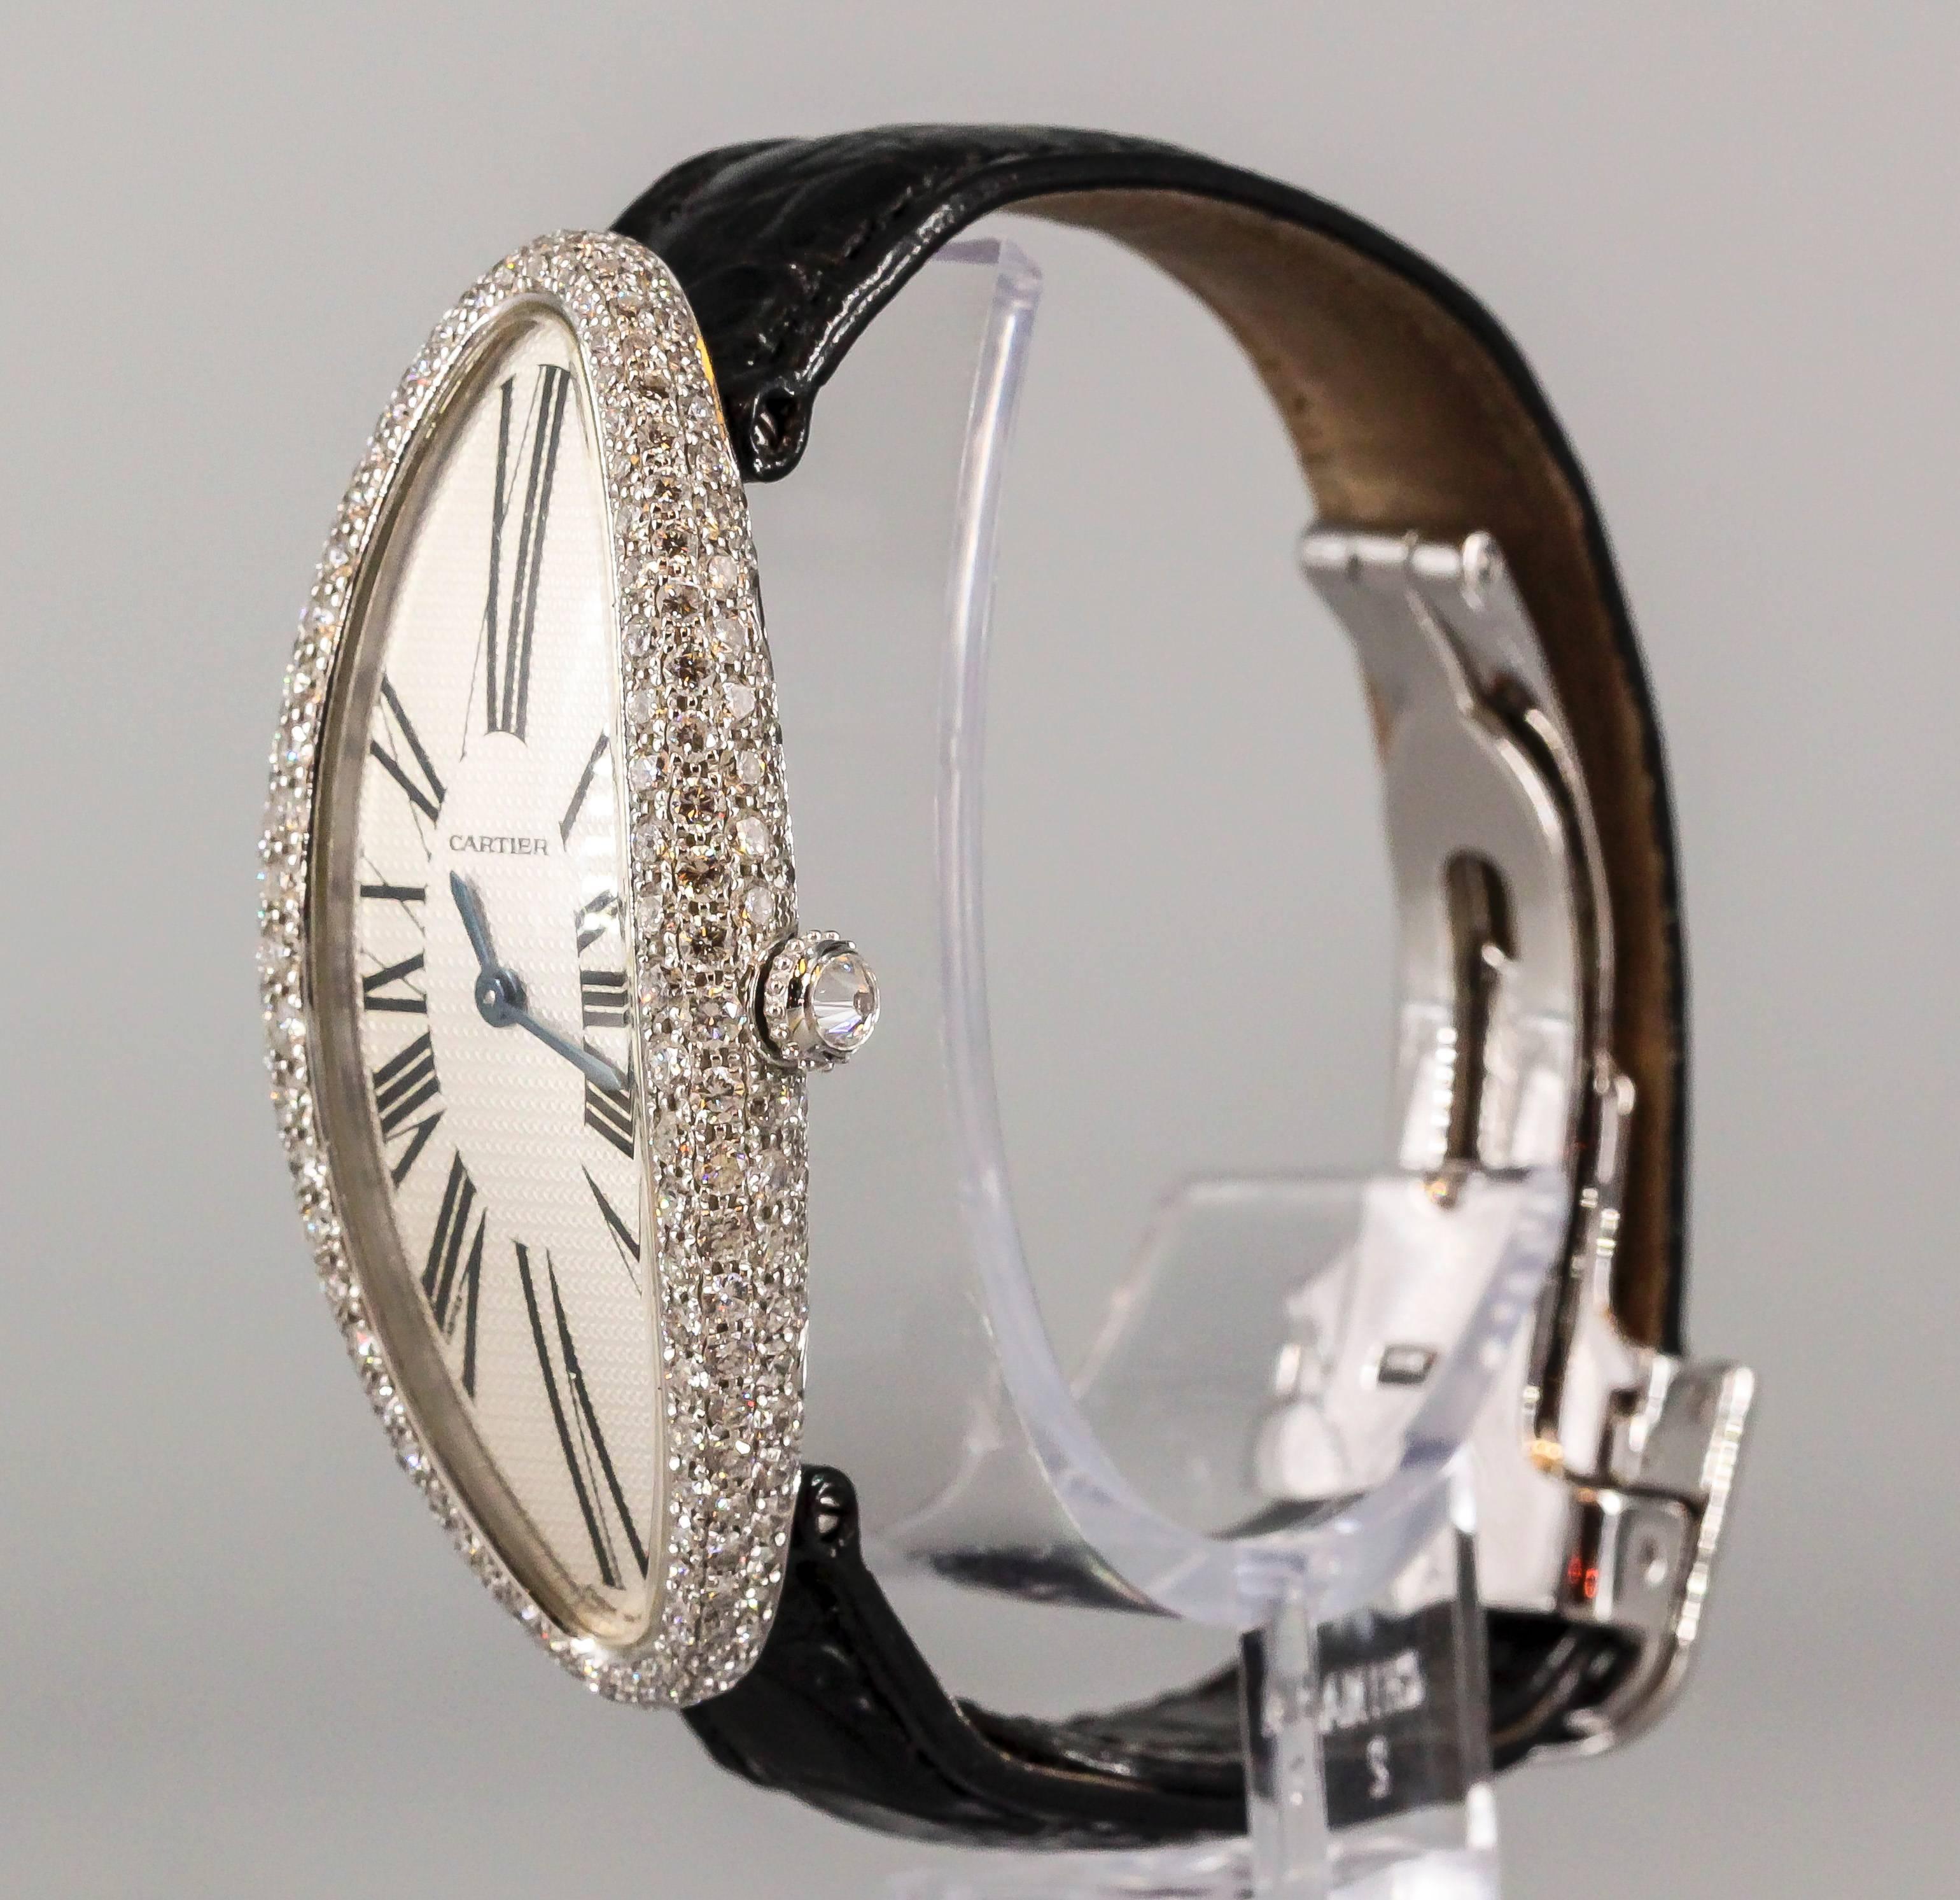 Elegant and feminine 18K white gold and diamond women's wristwatch from the 